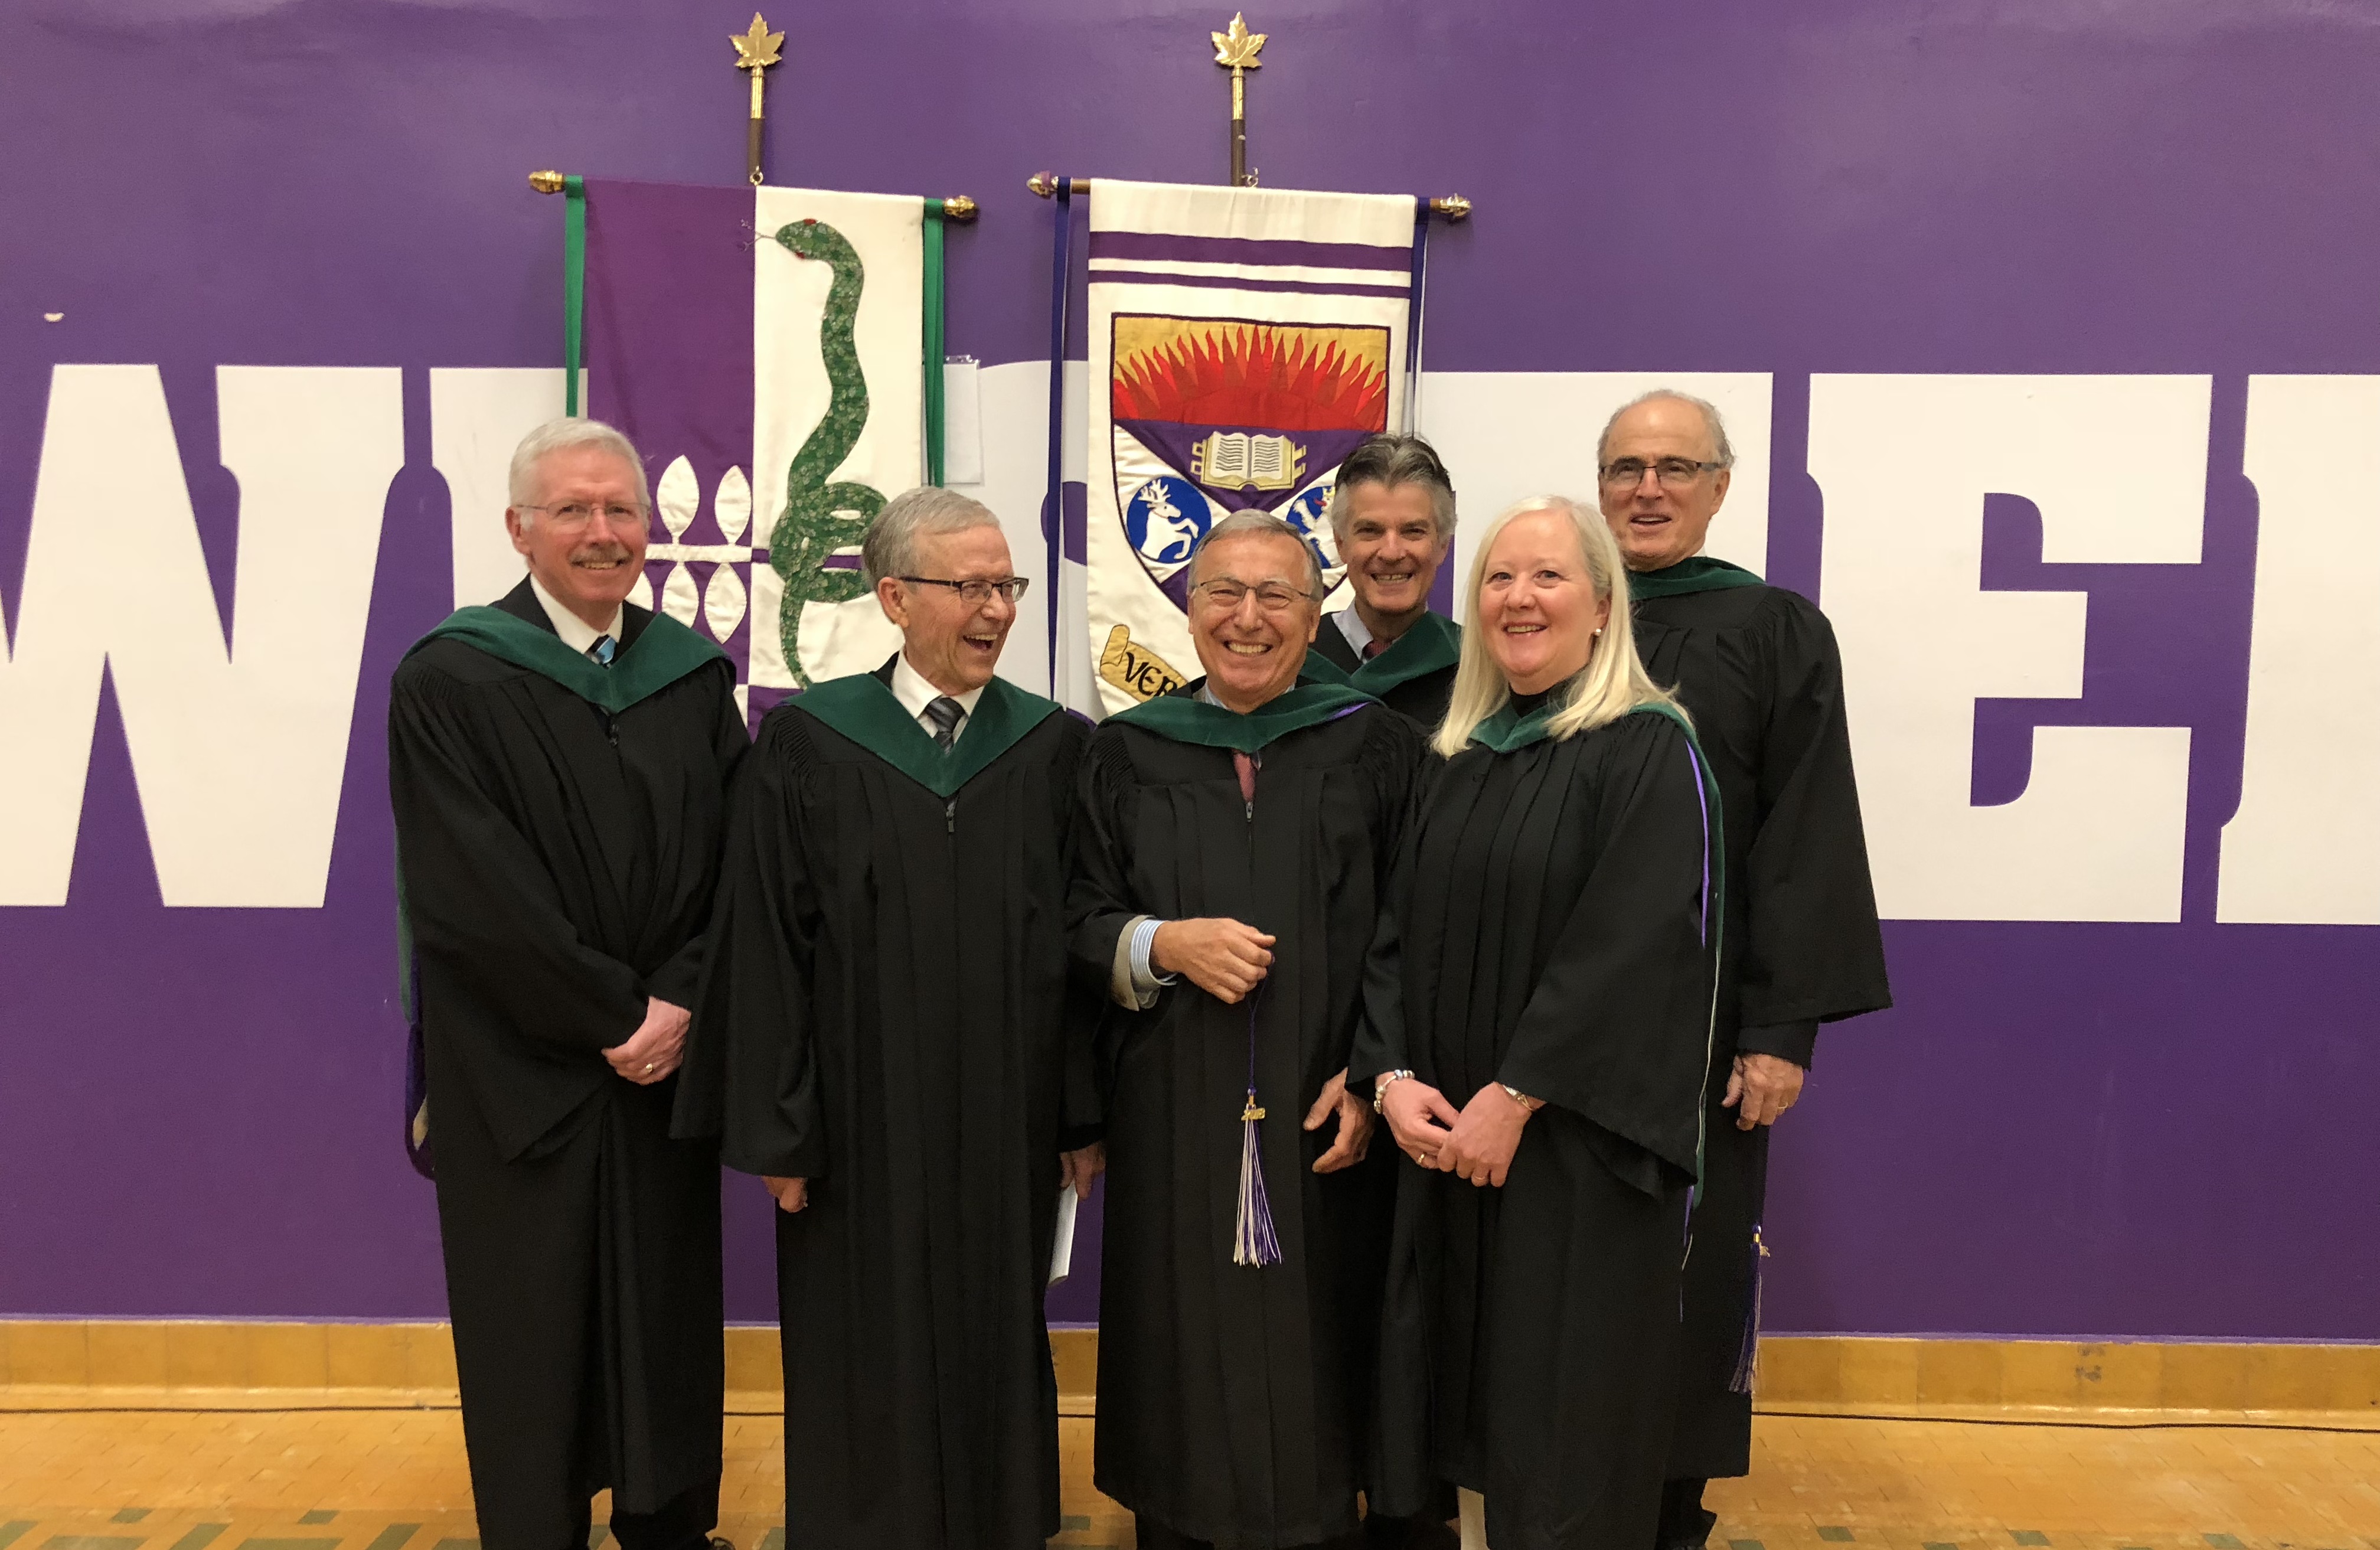 Schulich Convocation, Alumni Hall, Western University, May 11, 2018